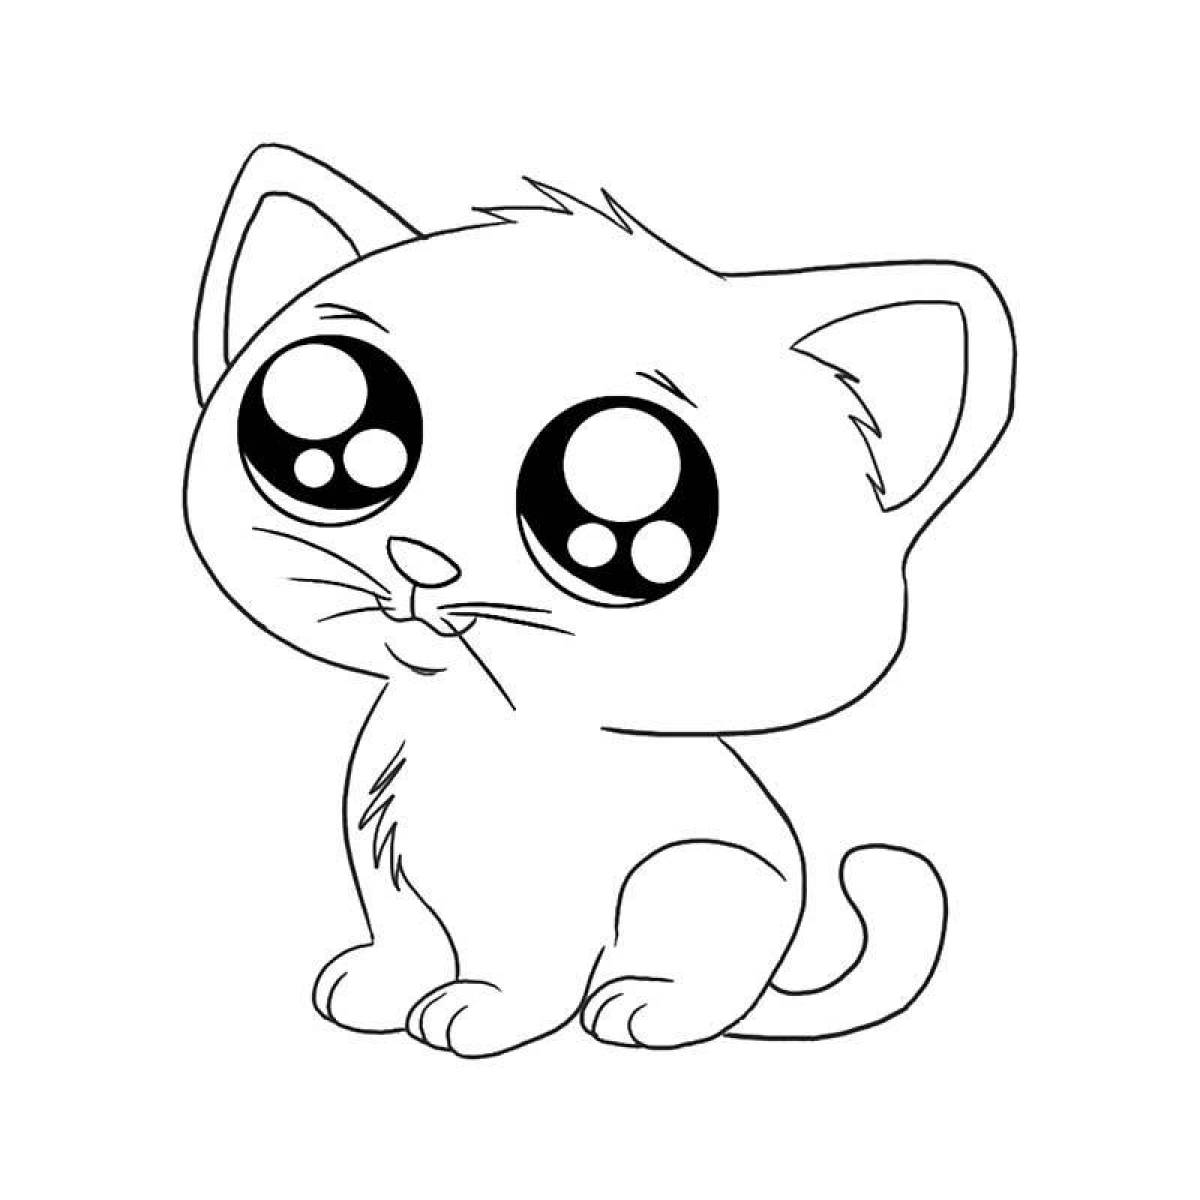 Cunning cute cat coloring page